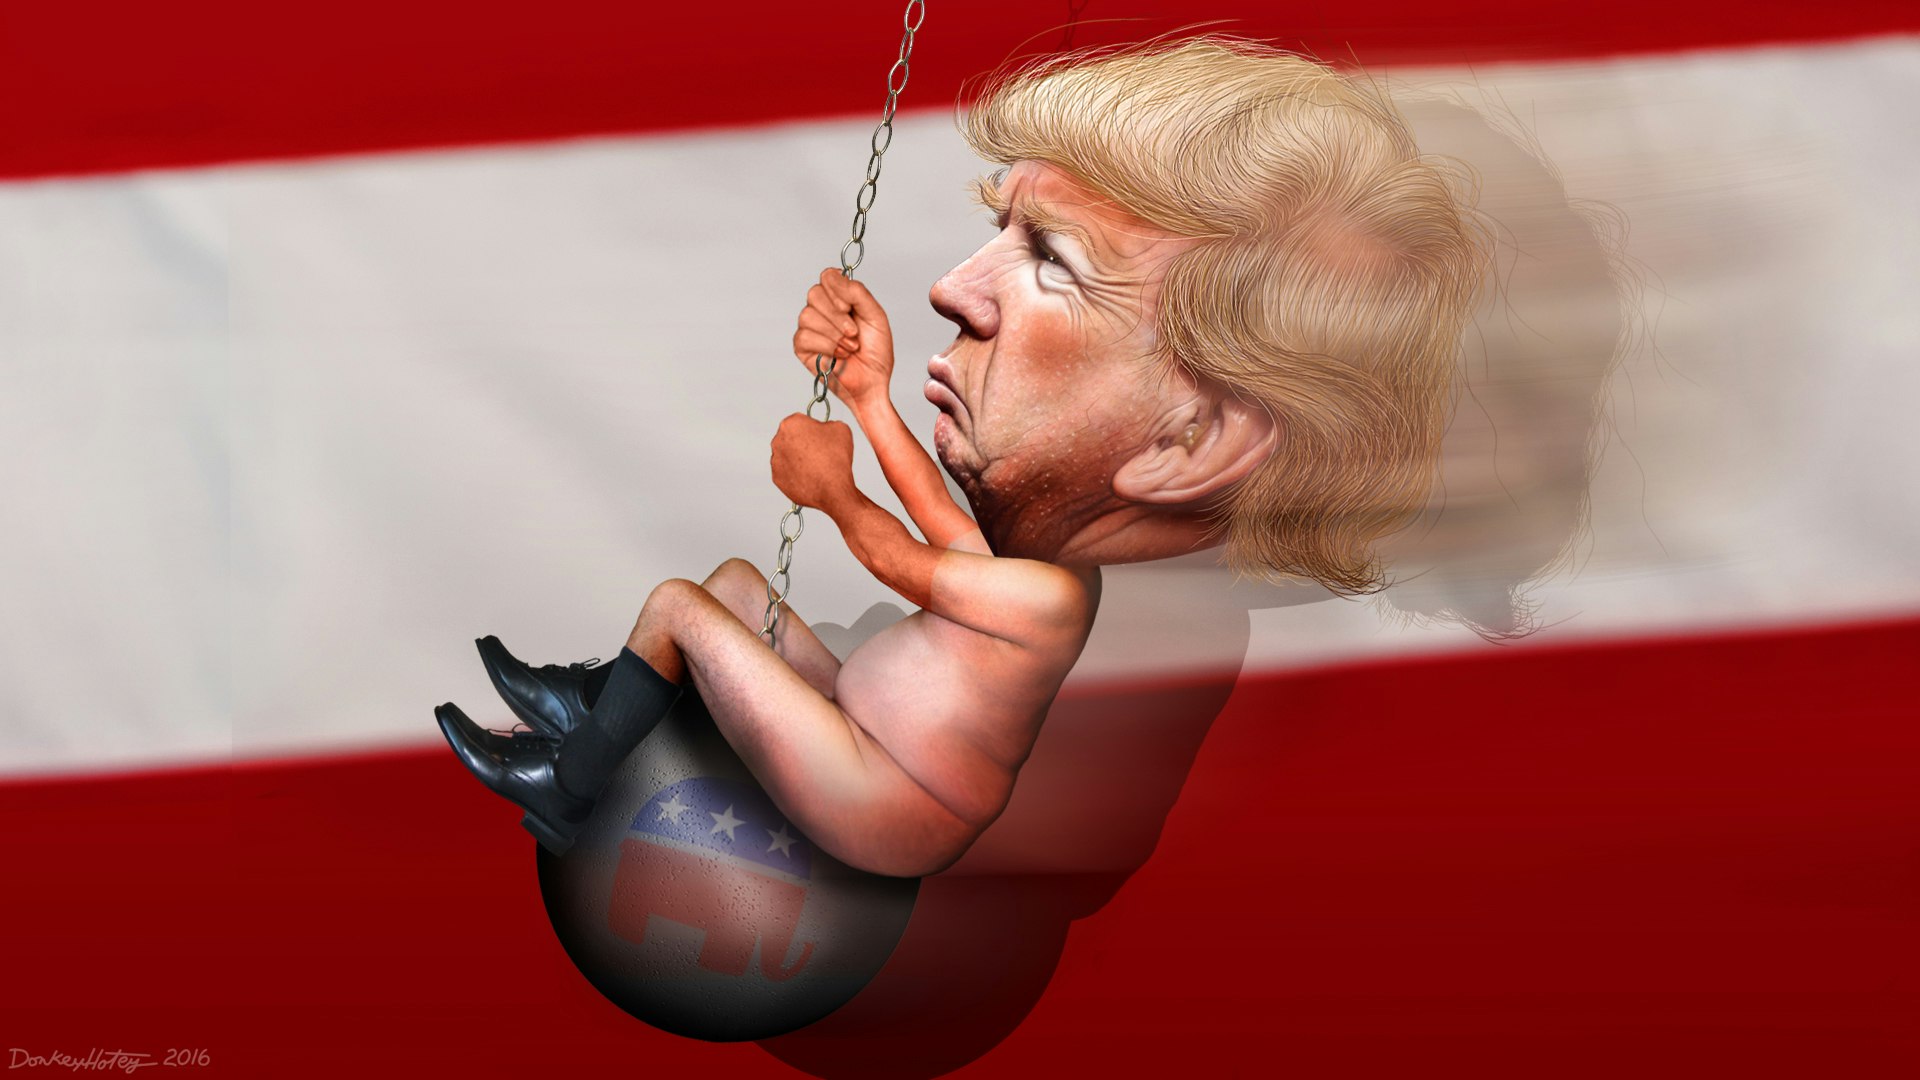 My Month With Trump: He came in like a wrecking ball